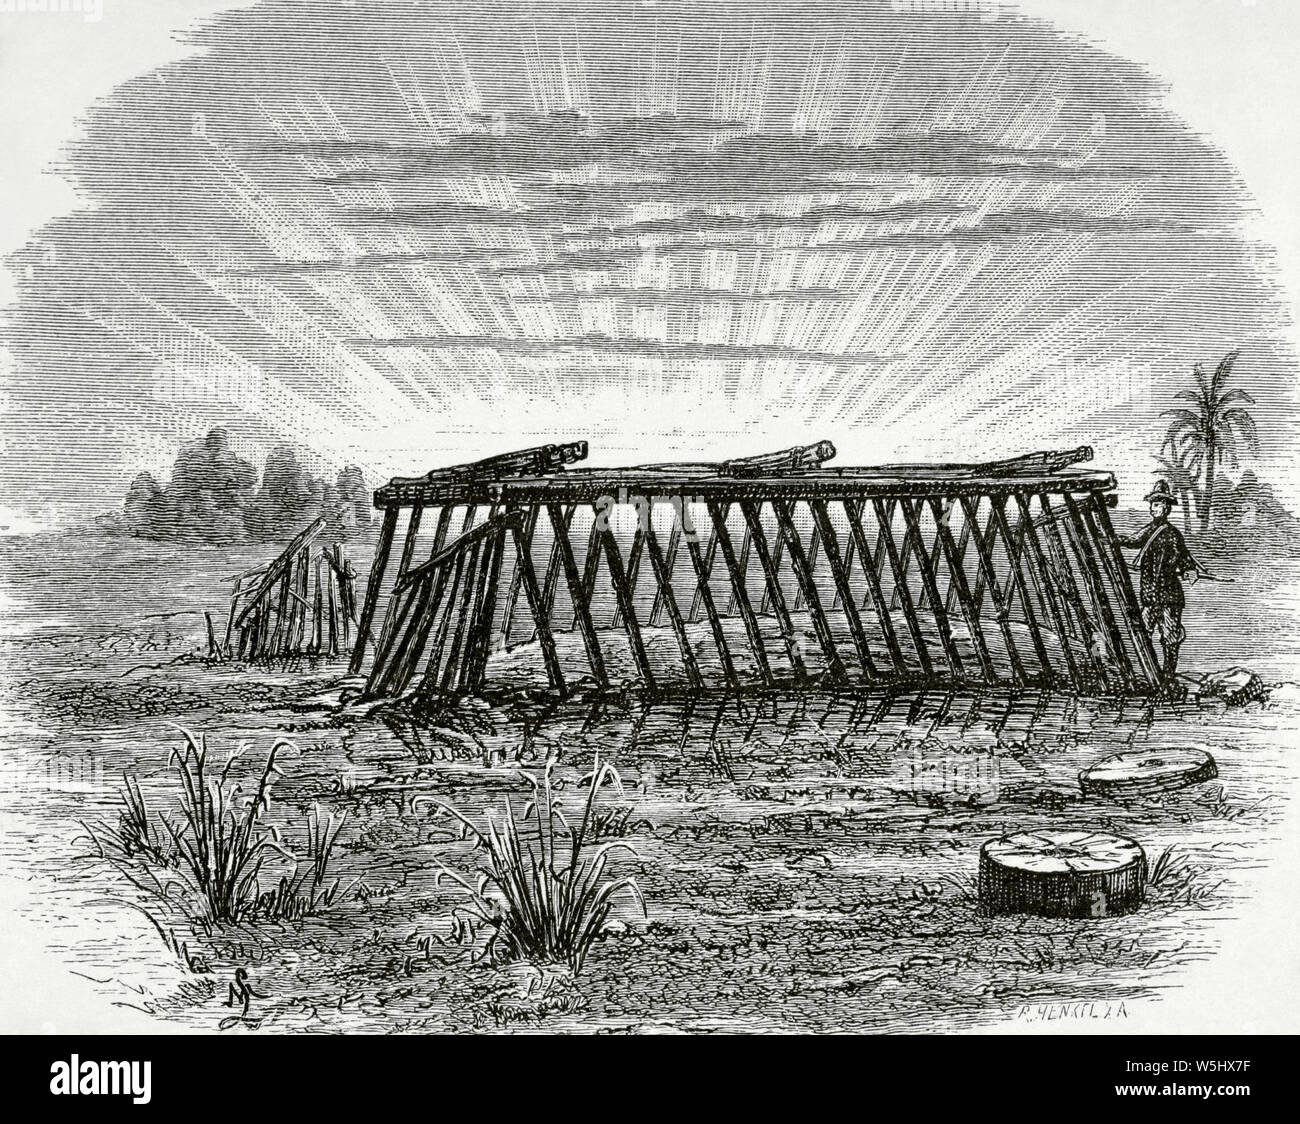 Central Africa. Expedition of Stanley. Sepulcher of an indigenous chief. Kingdom of Loango (large region, at present Angola, Congo and Gabon). Engraving. Africa inexplorada, el Continente Misterioso by Henry Morton Stanley, c. 1887. Stock Photo